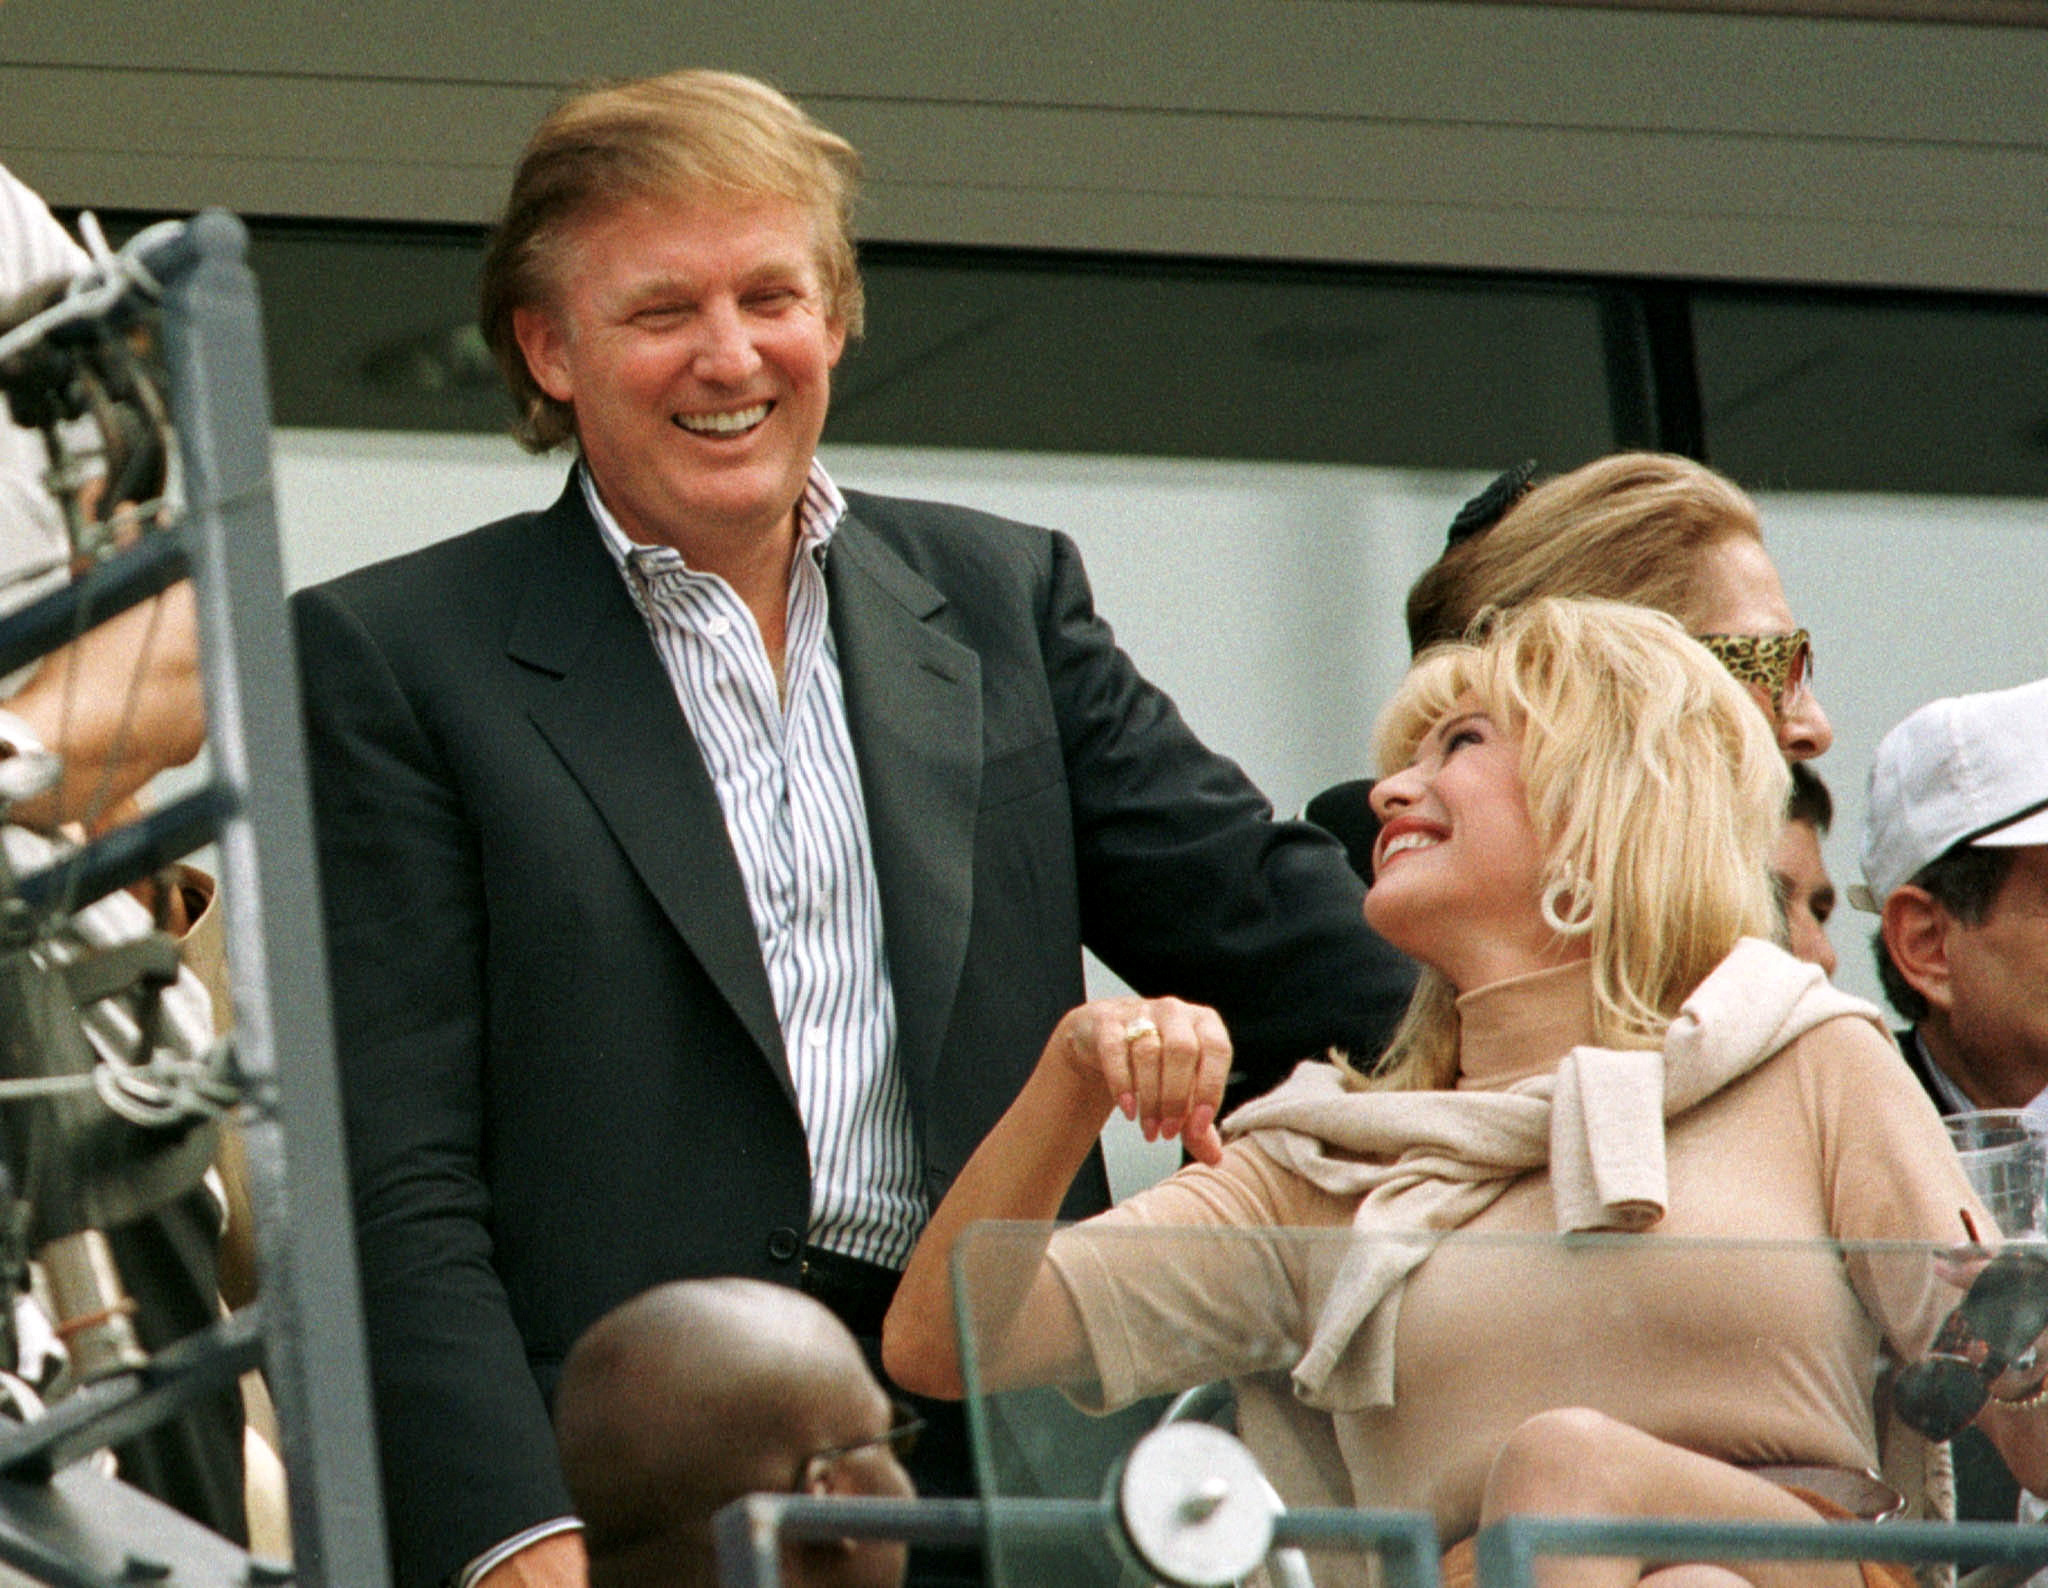 Developer Donald Trump talks with his former wife Ivana Trump during the men's final at the U.S. Open